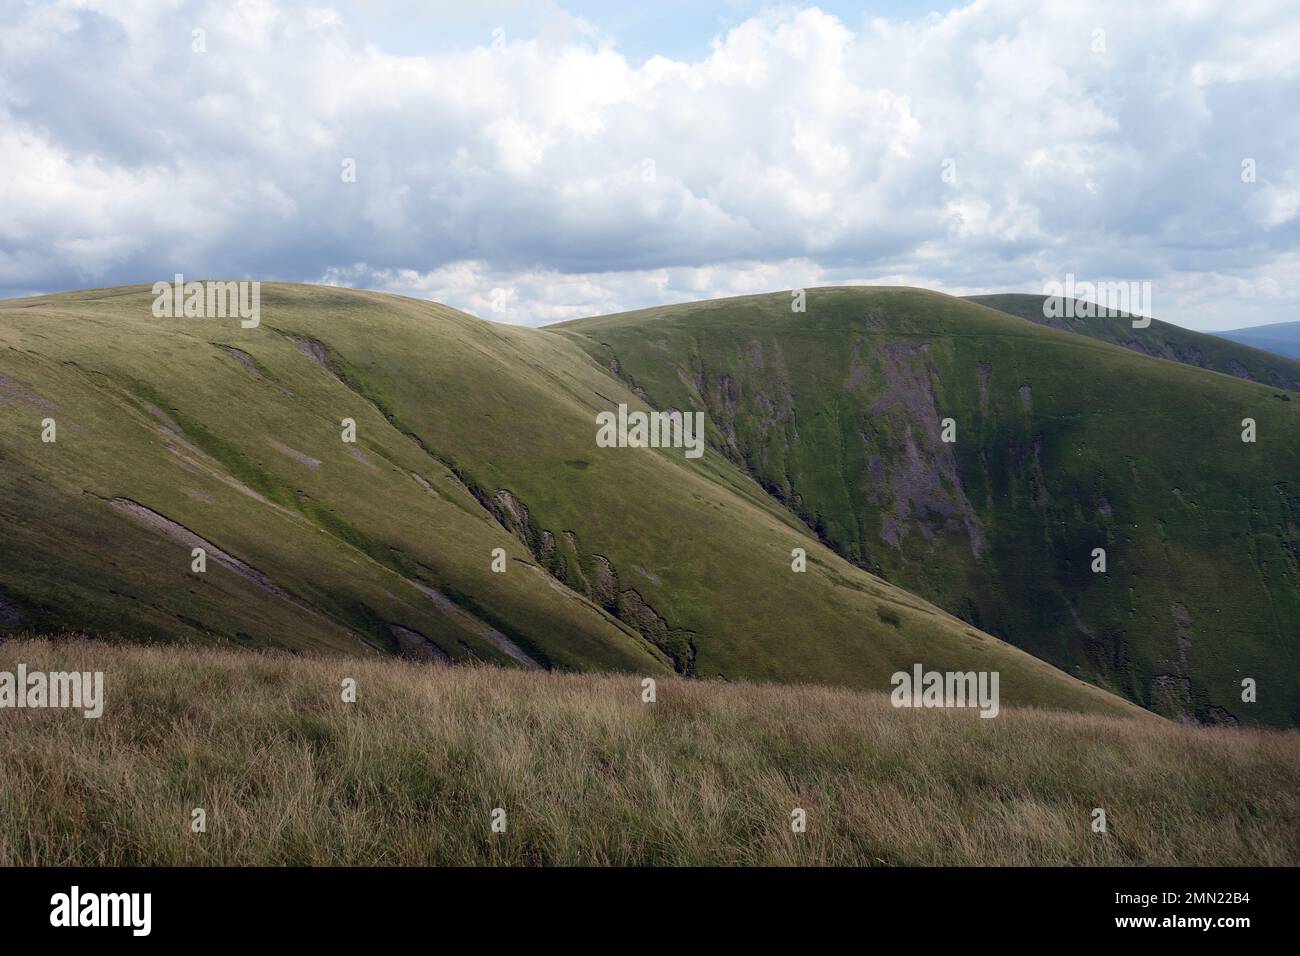 The Calf, Bram Rigg Top & Calders from White Fell Head sulle Howgilll Hills nel Yorkshire Dales National Park, Inghilterra, Regno Unito. Foto Stock